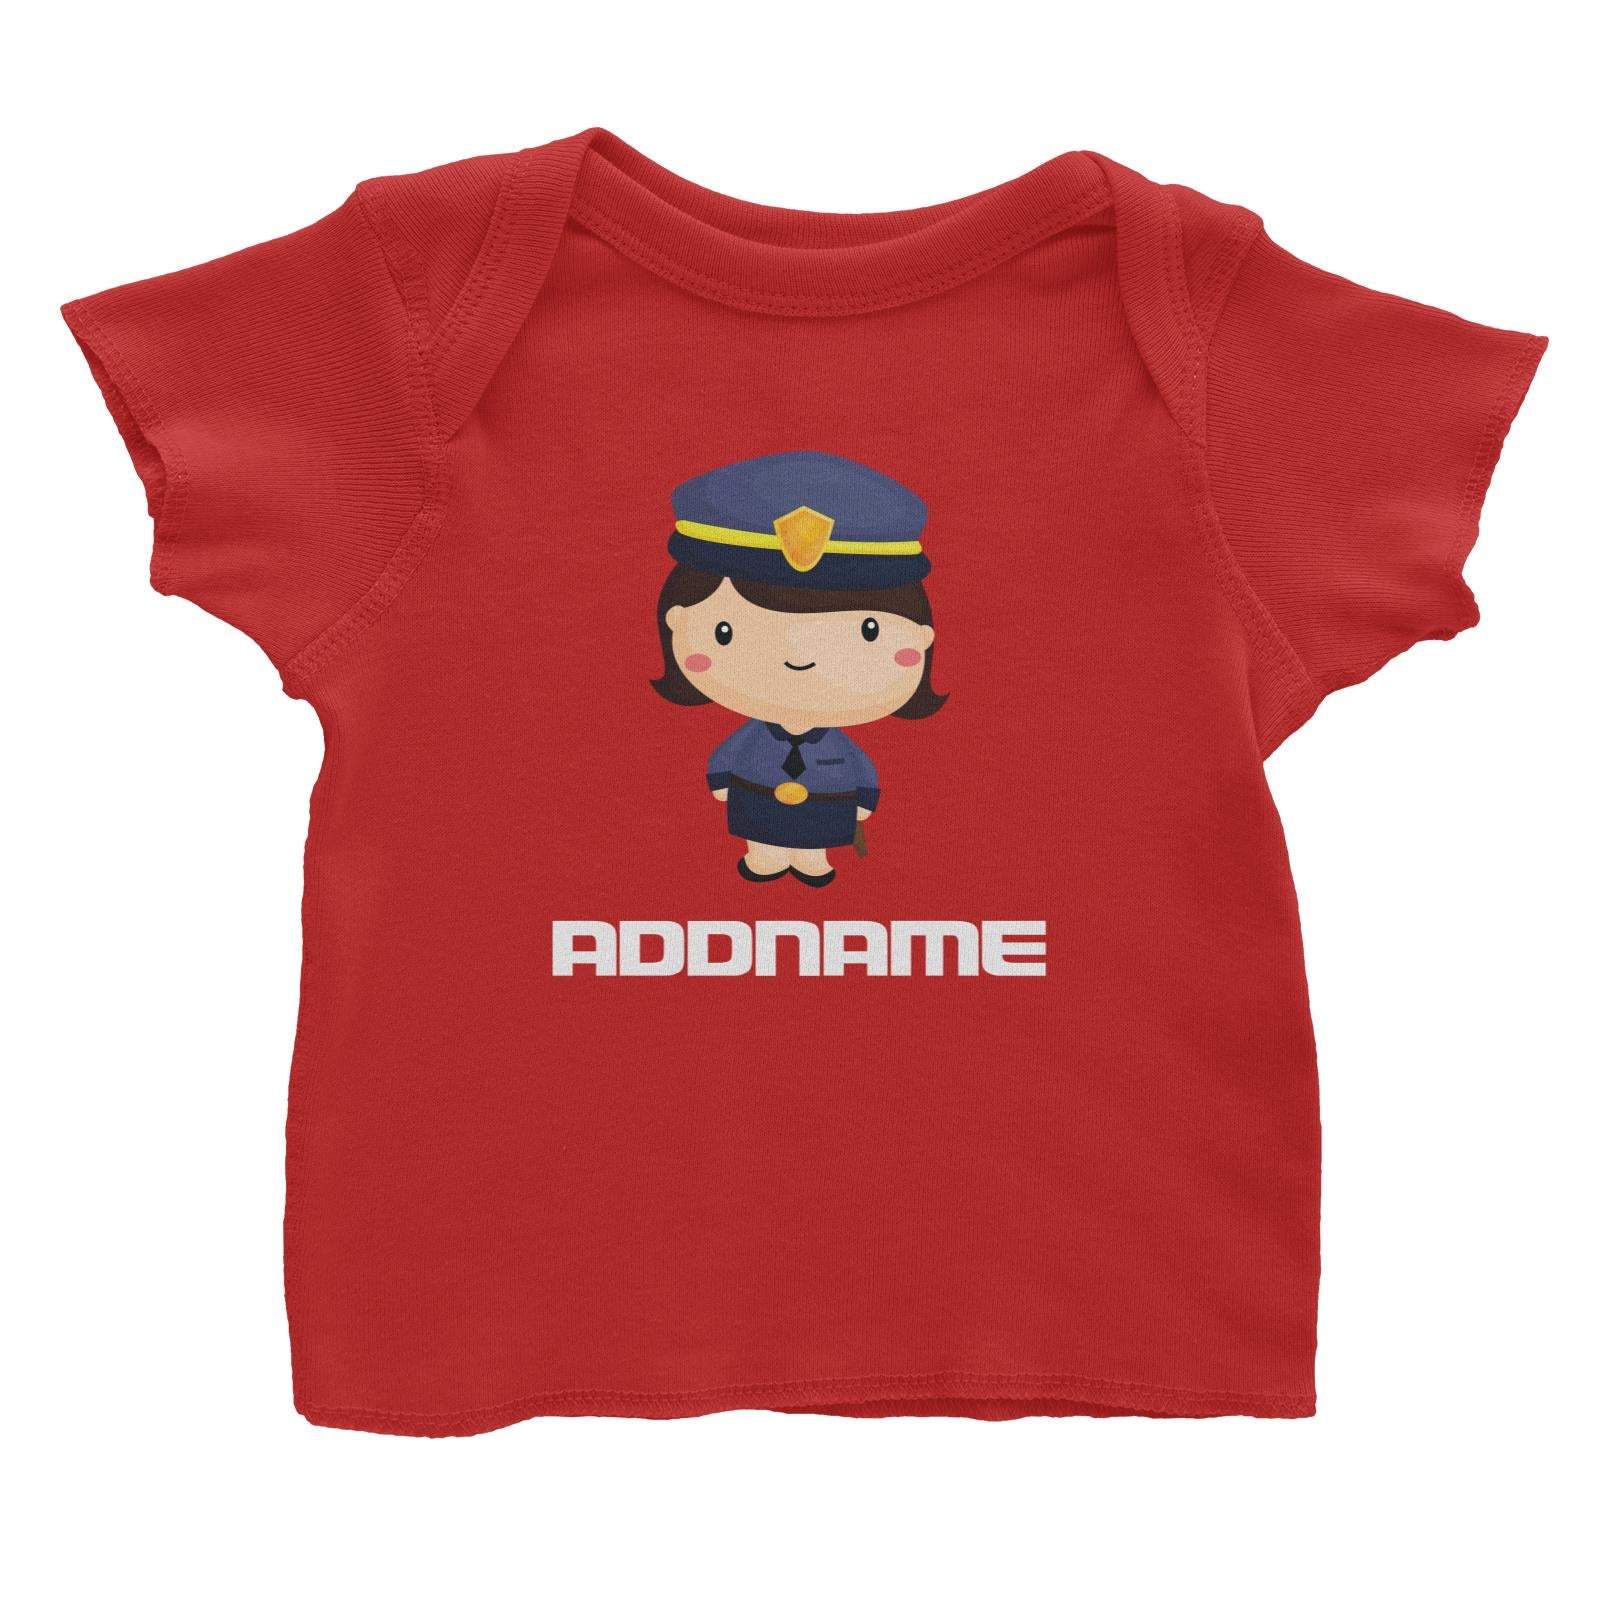 Birthday Police Officer Short Hair Girl  In Suit Addname Baby T-Shirt